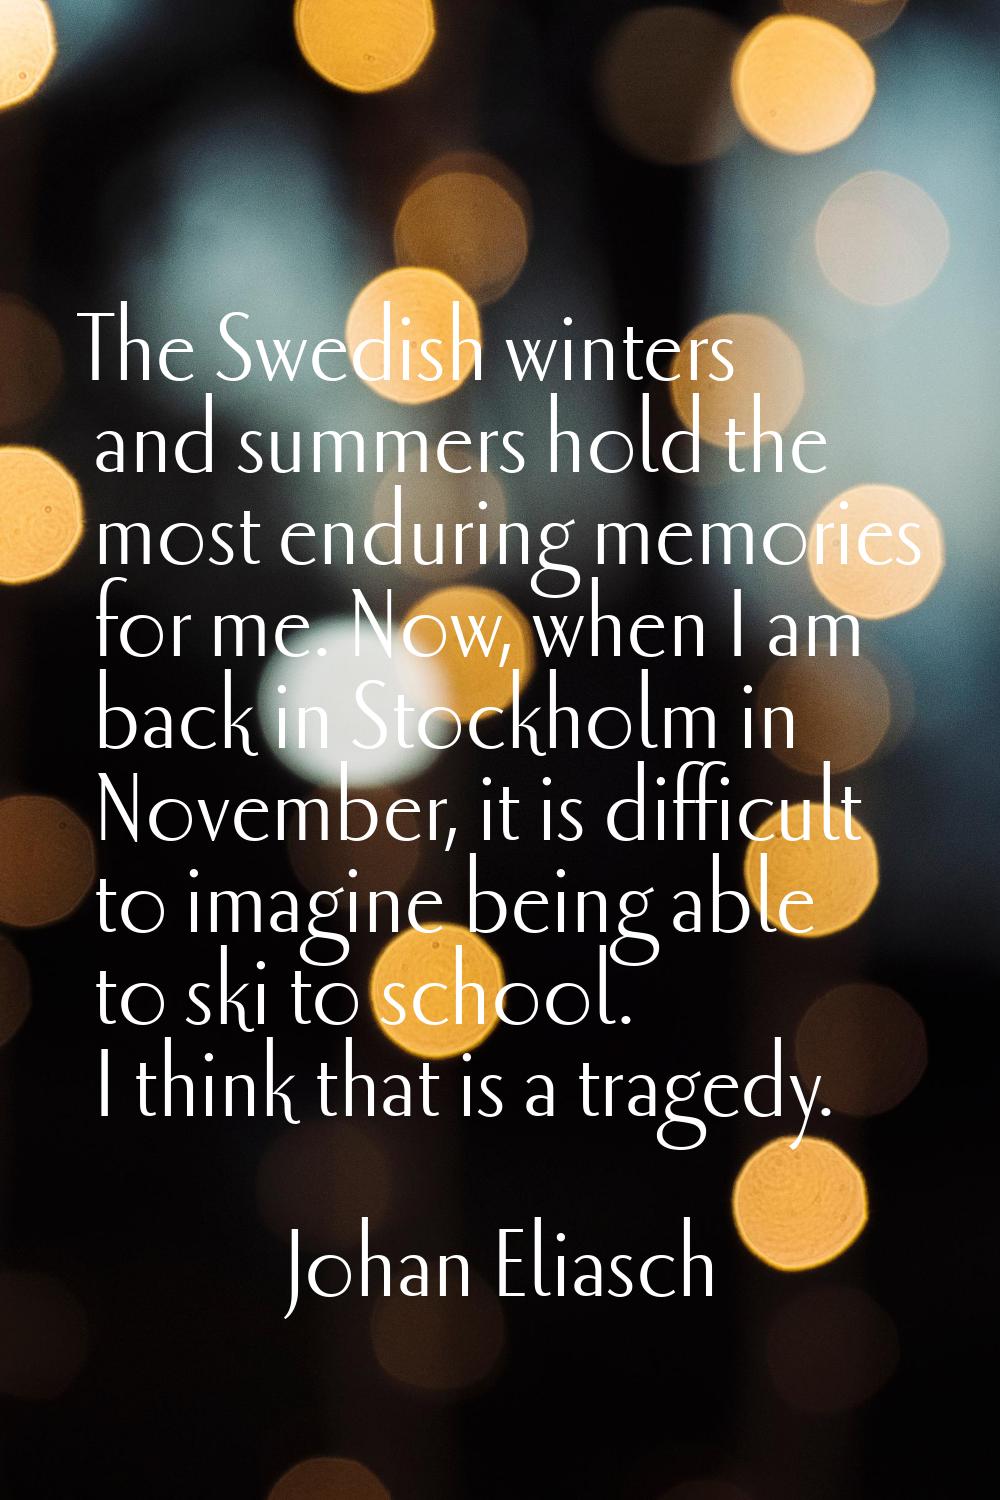 The Swedish winters and summers hold the most enduring memories for me. Now, when I am back in Stoc